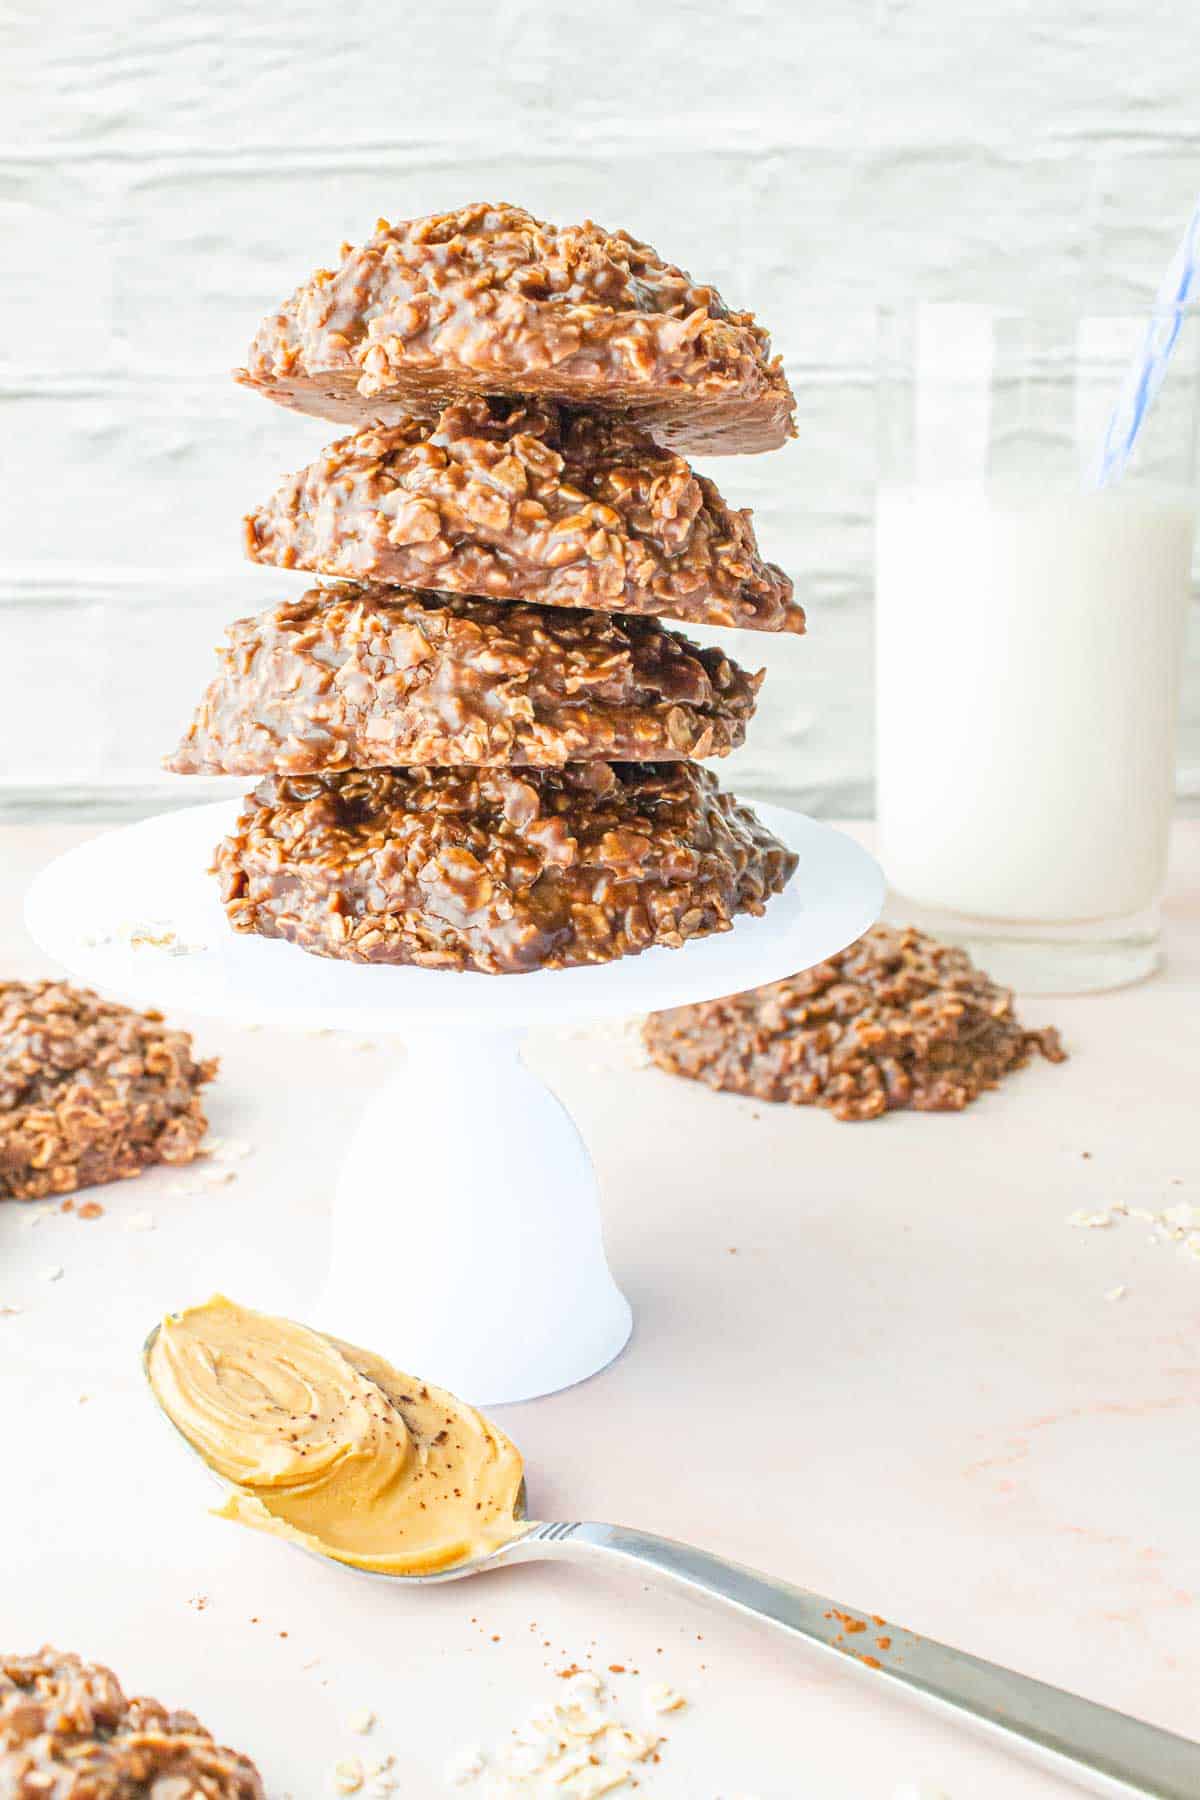 Old Fashioned No Bake Chocolate Oatmeal Cookies with Peanut Butter in a stick of 4 cookies.